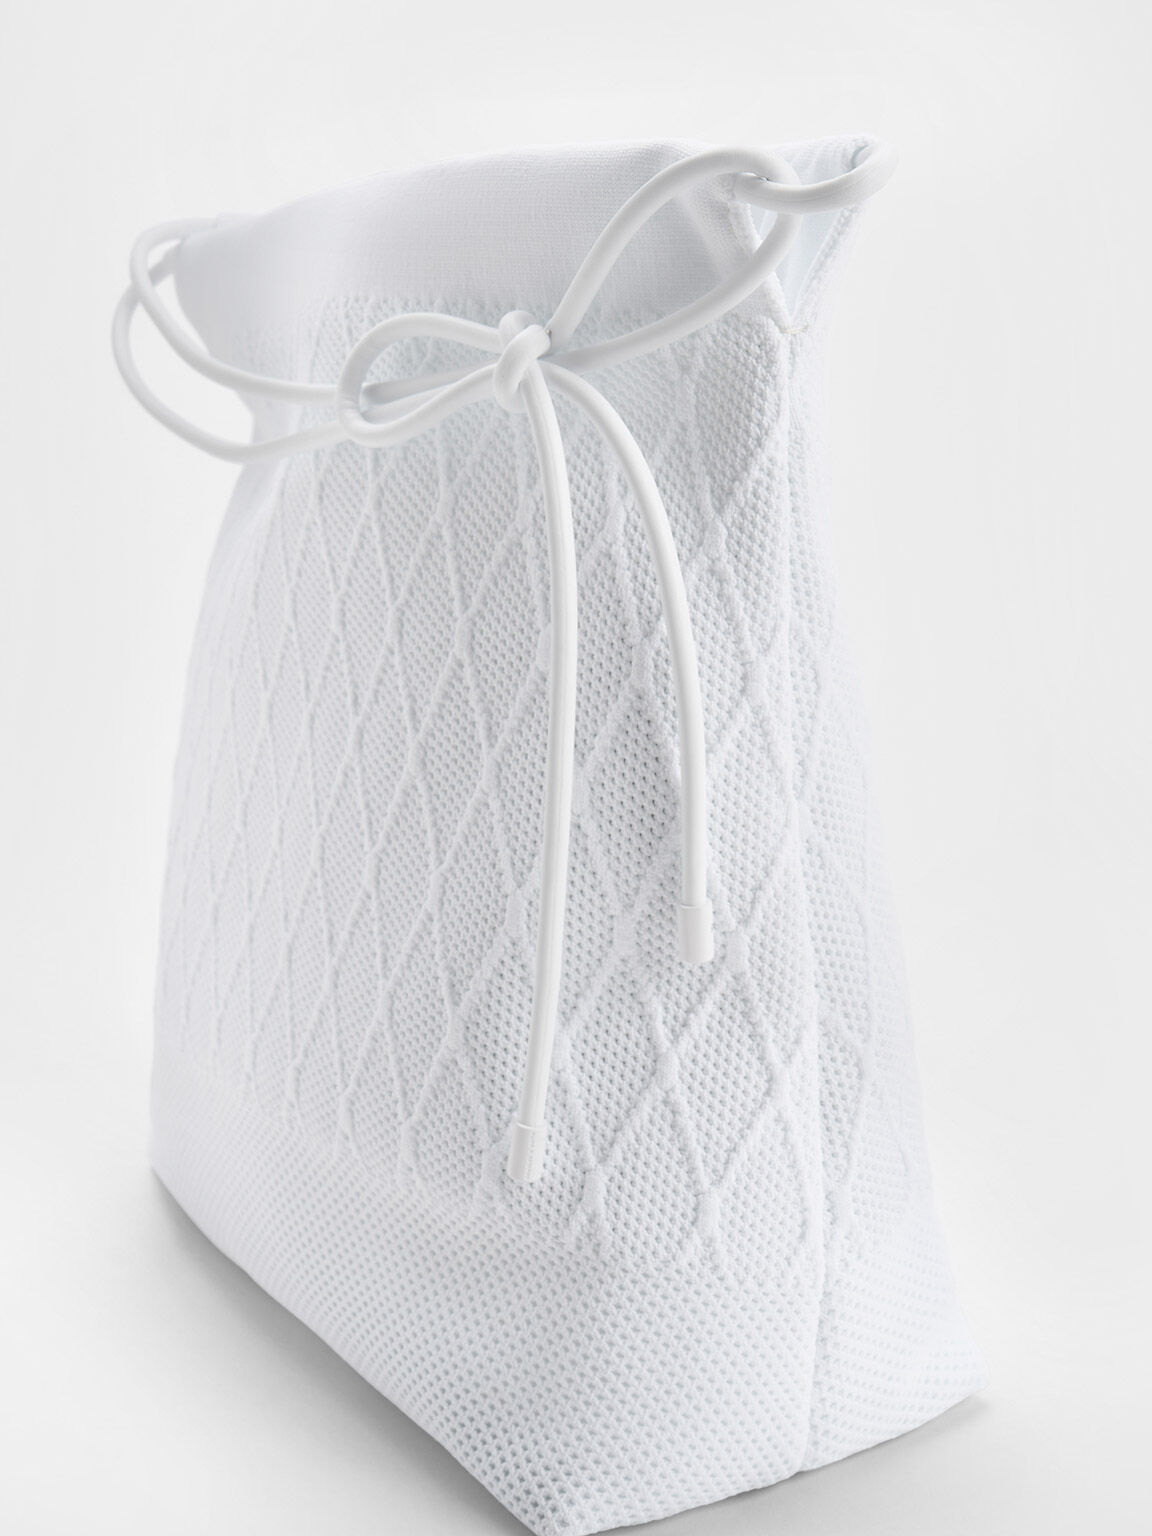 Genoa Bow-Tie Knitted Bag, White, hi-res